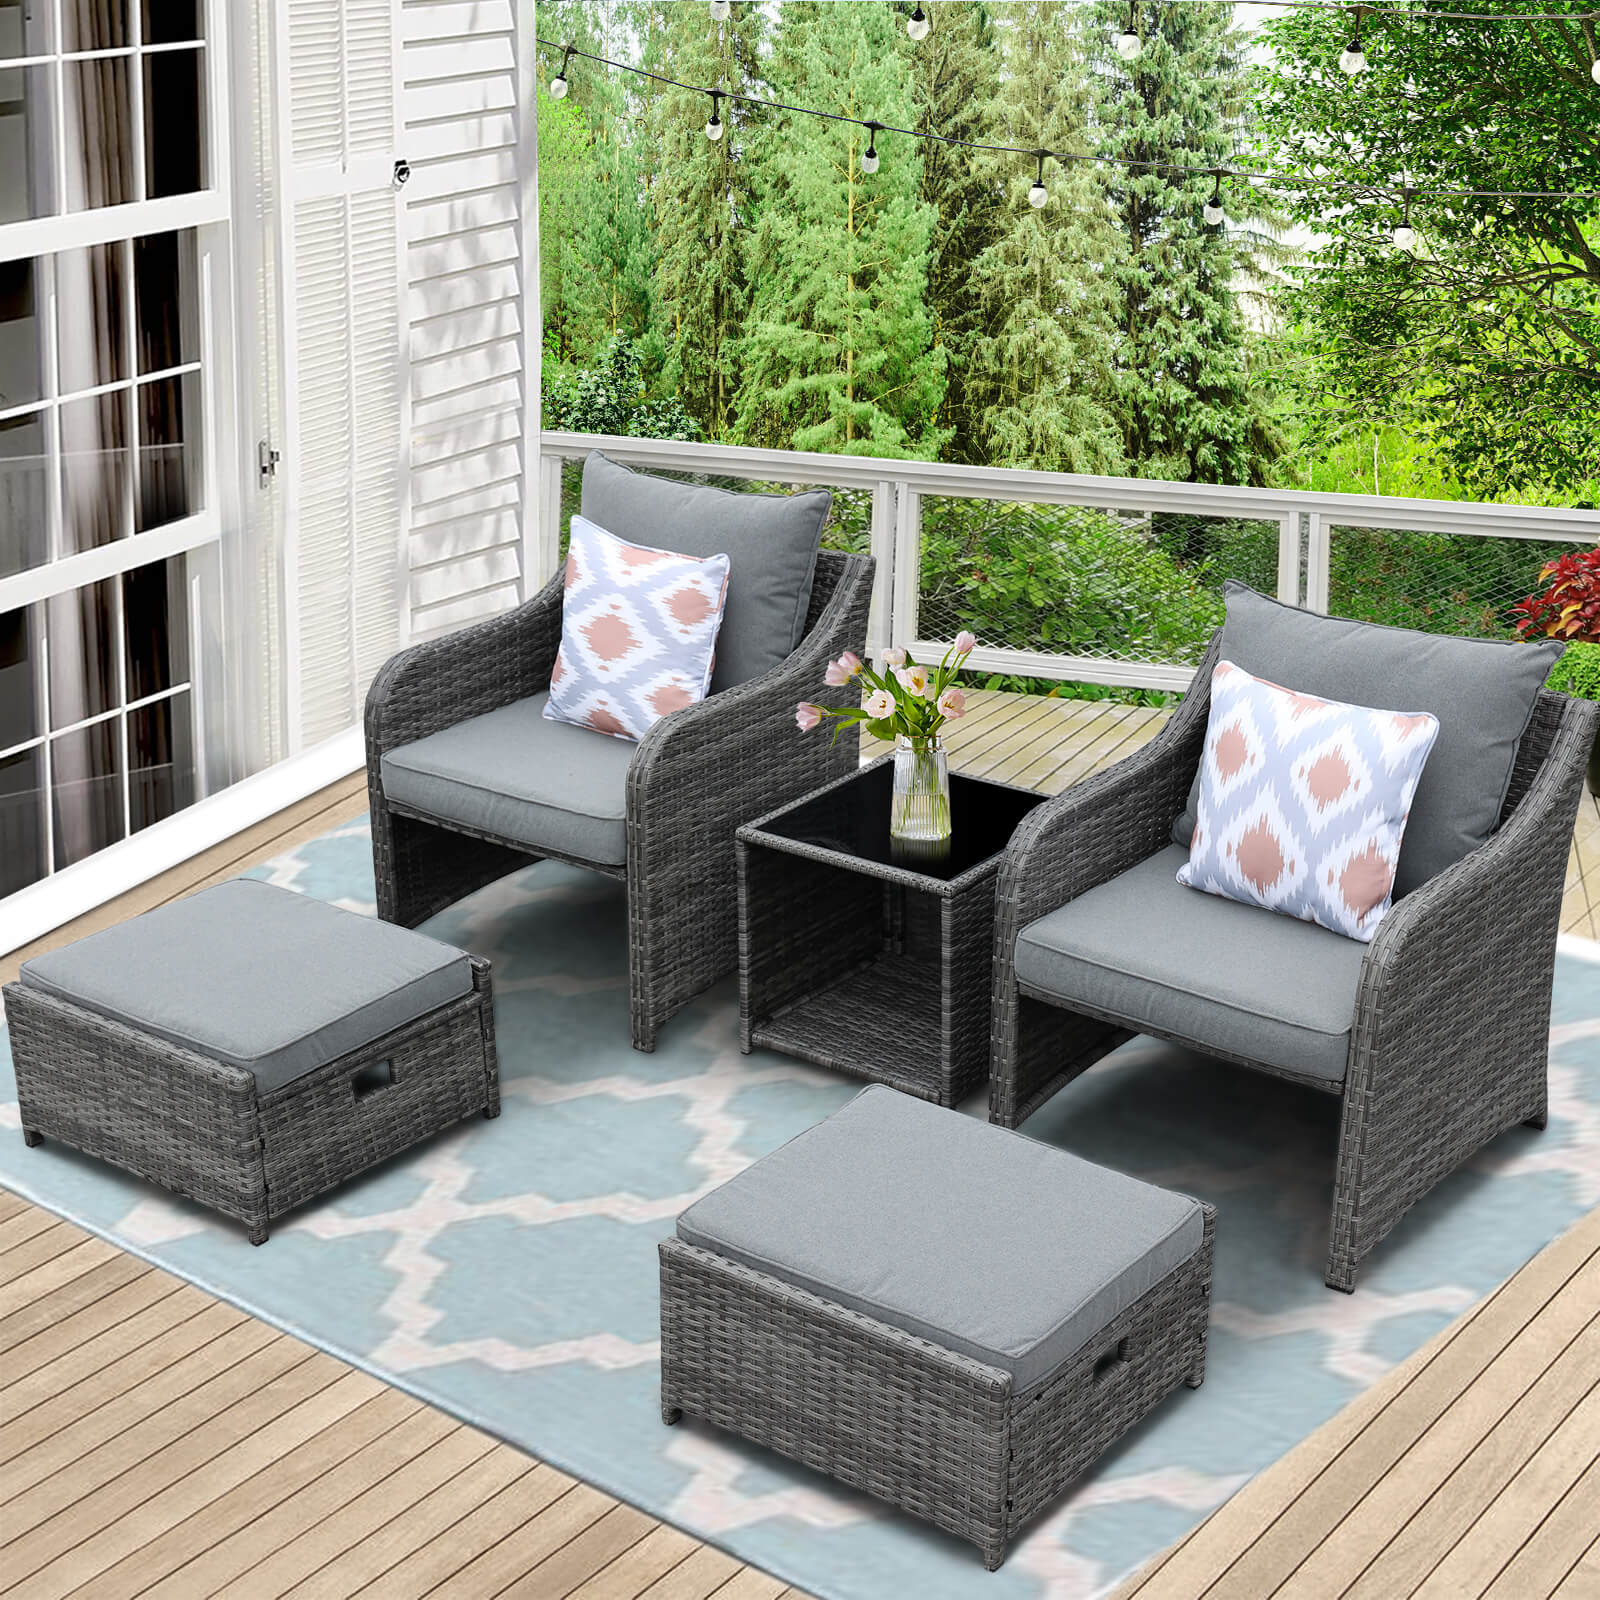 5 Pcs Patio Wicker Sofa Chair Set w/ 2 Ottomans, 4 Pillows, Coffee Table & Fabric Cover, Gray